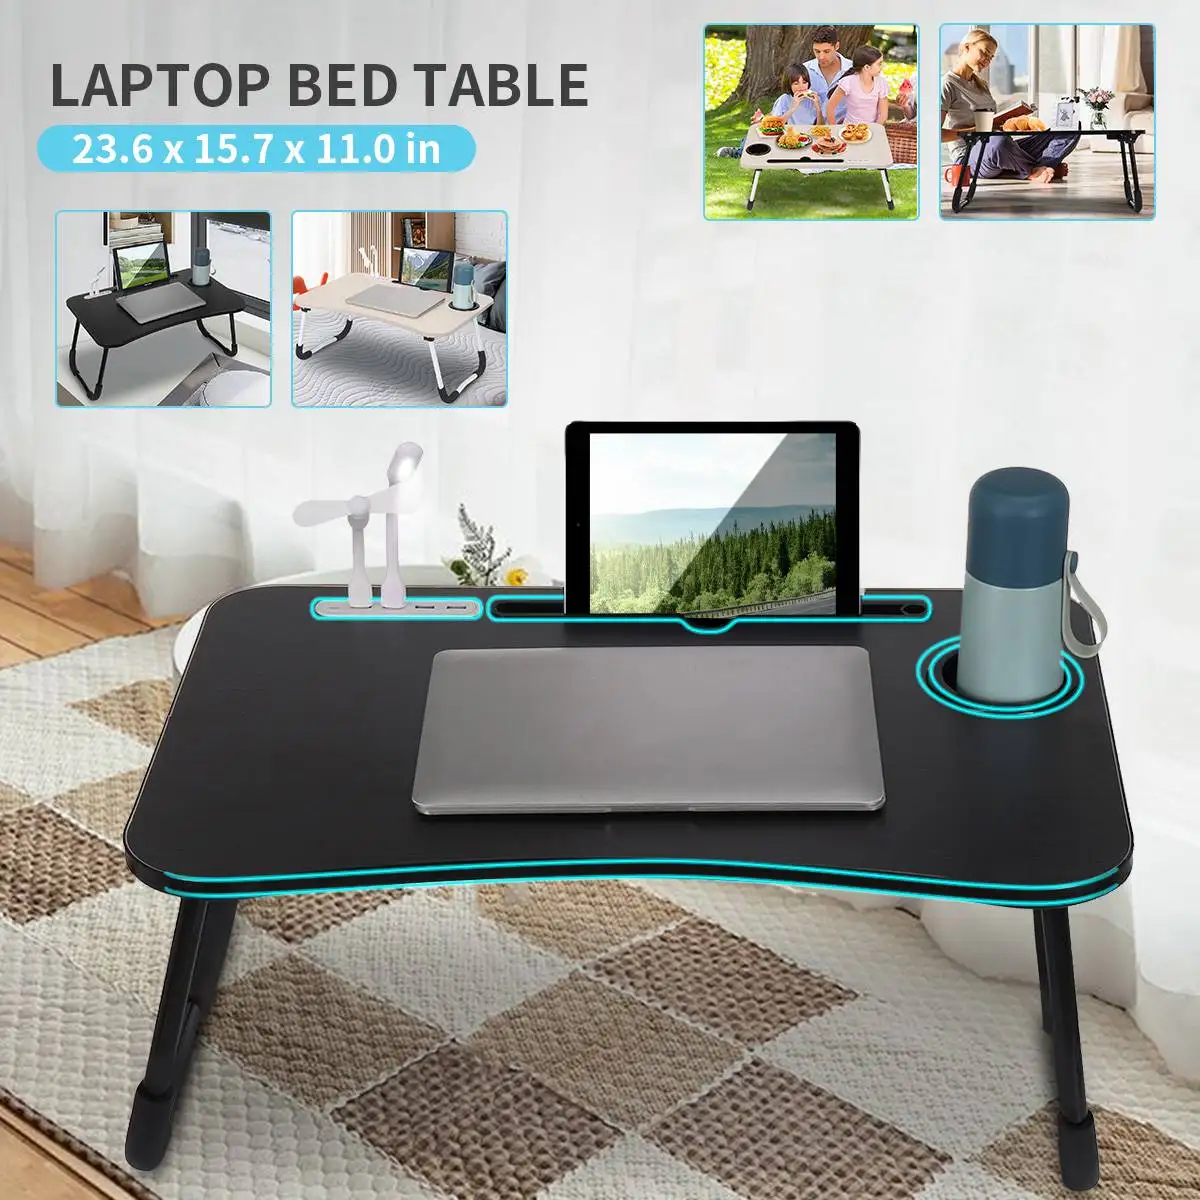 

Portable Folding Laptop Computer Desk Picnic Breakfast Tray Holder Bed Sofa Tea Serving Table Wooden Foldable Study Table Stand